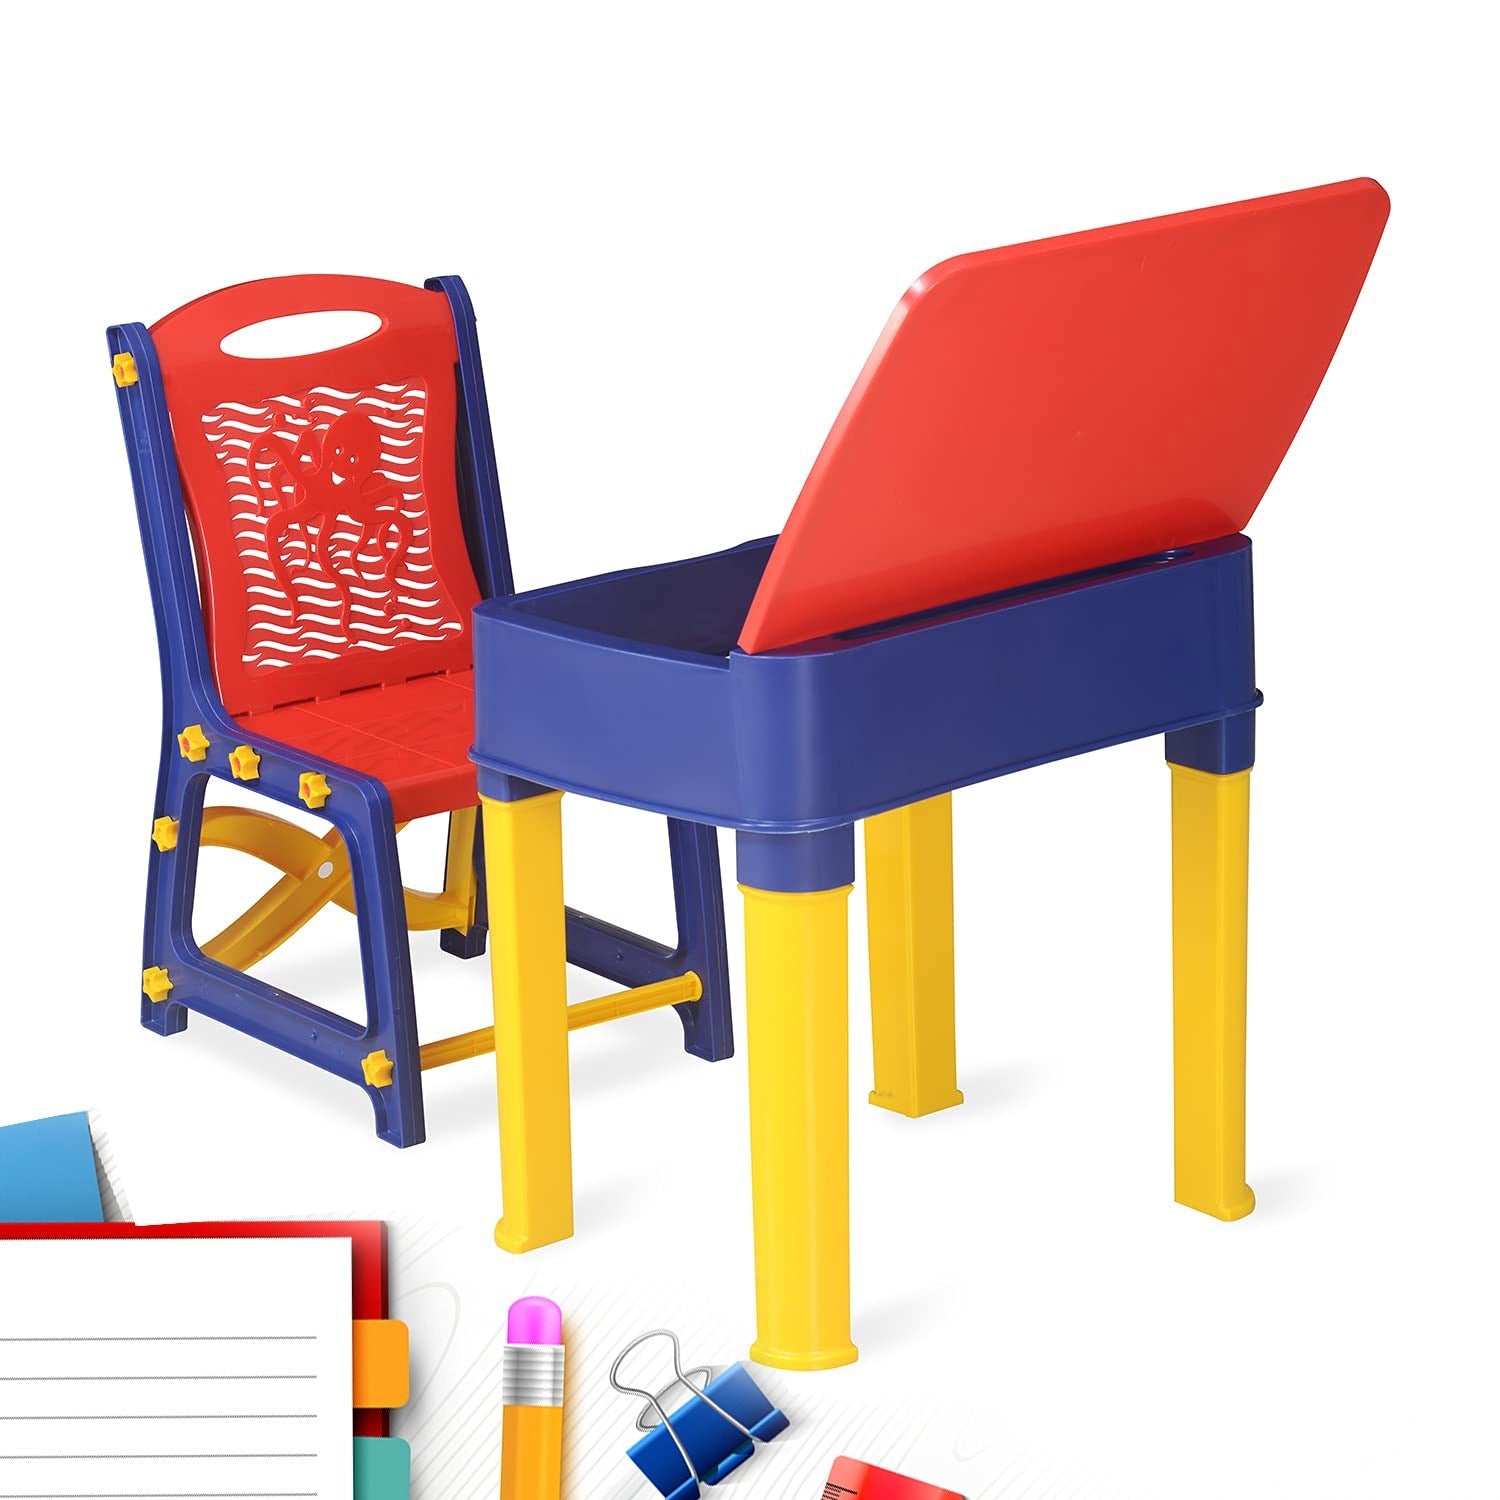 4594C Study Table And Chair Set For Boys And Girls With Small Box Space For Pencils Plastic High Quality Study Table (Red/Blue/Yellow)